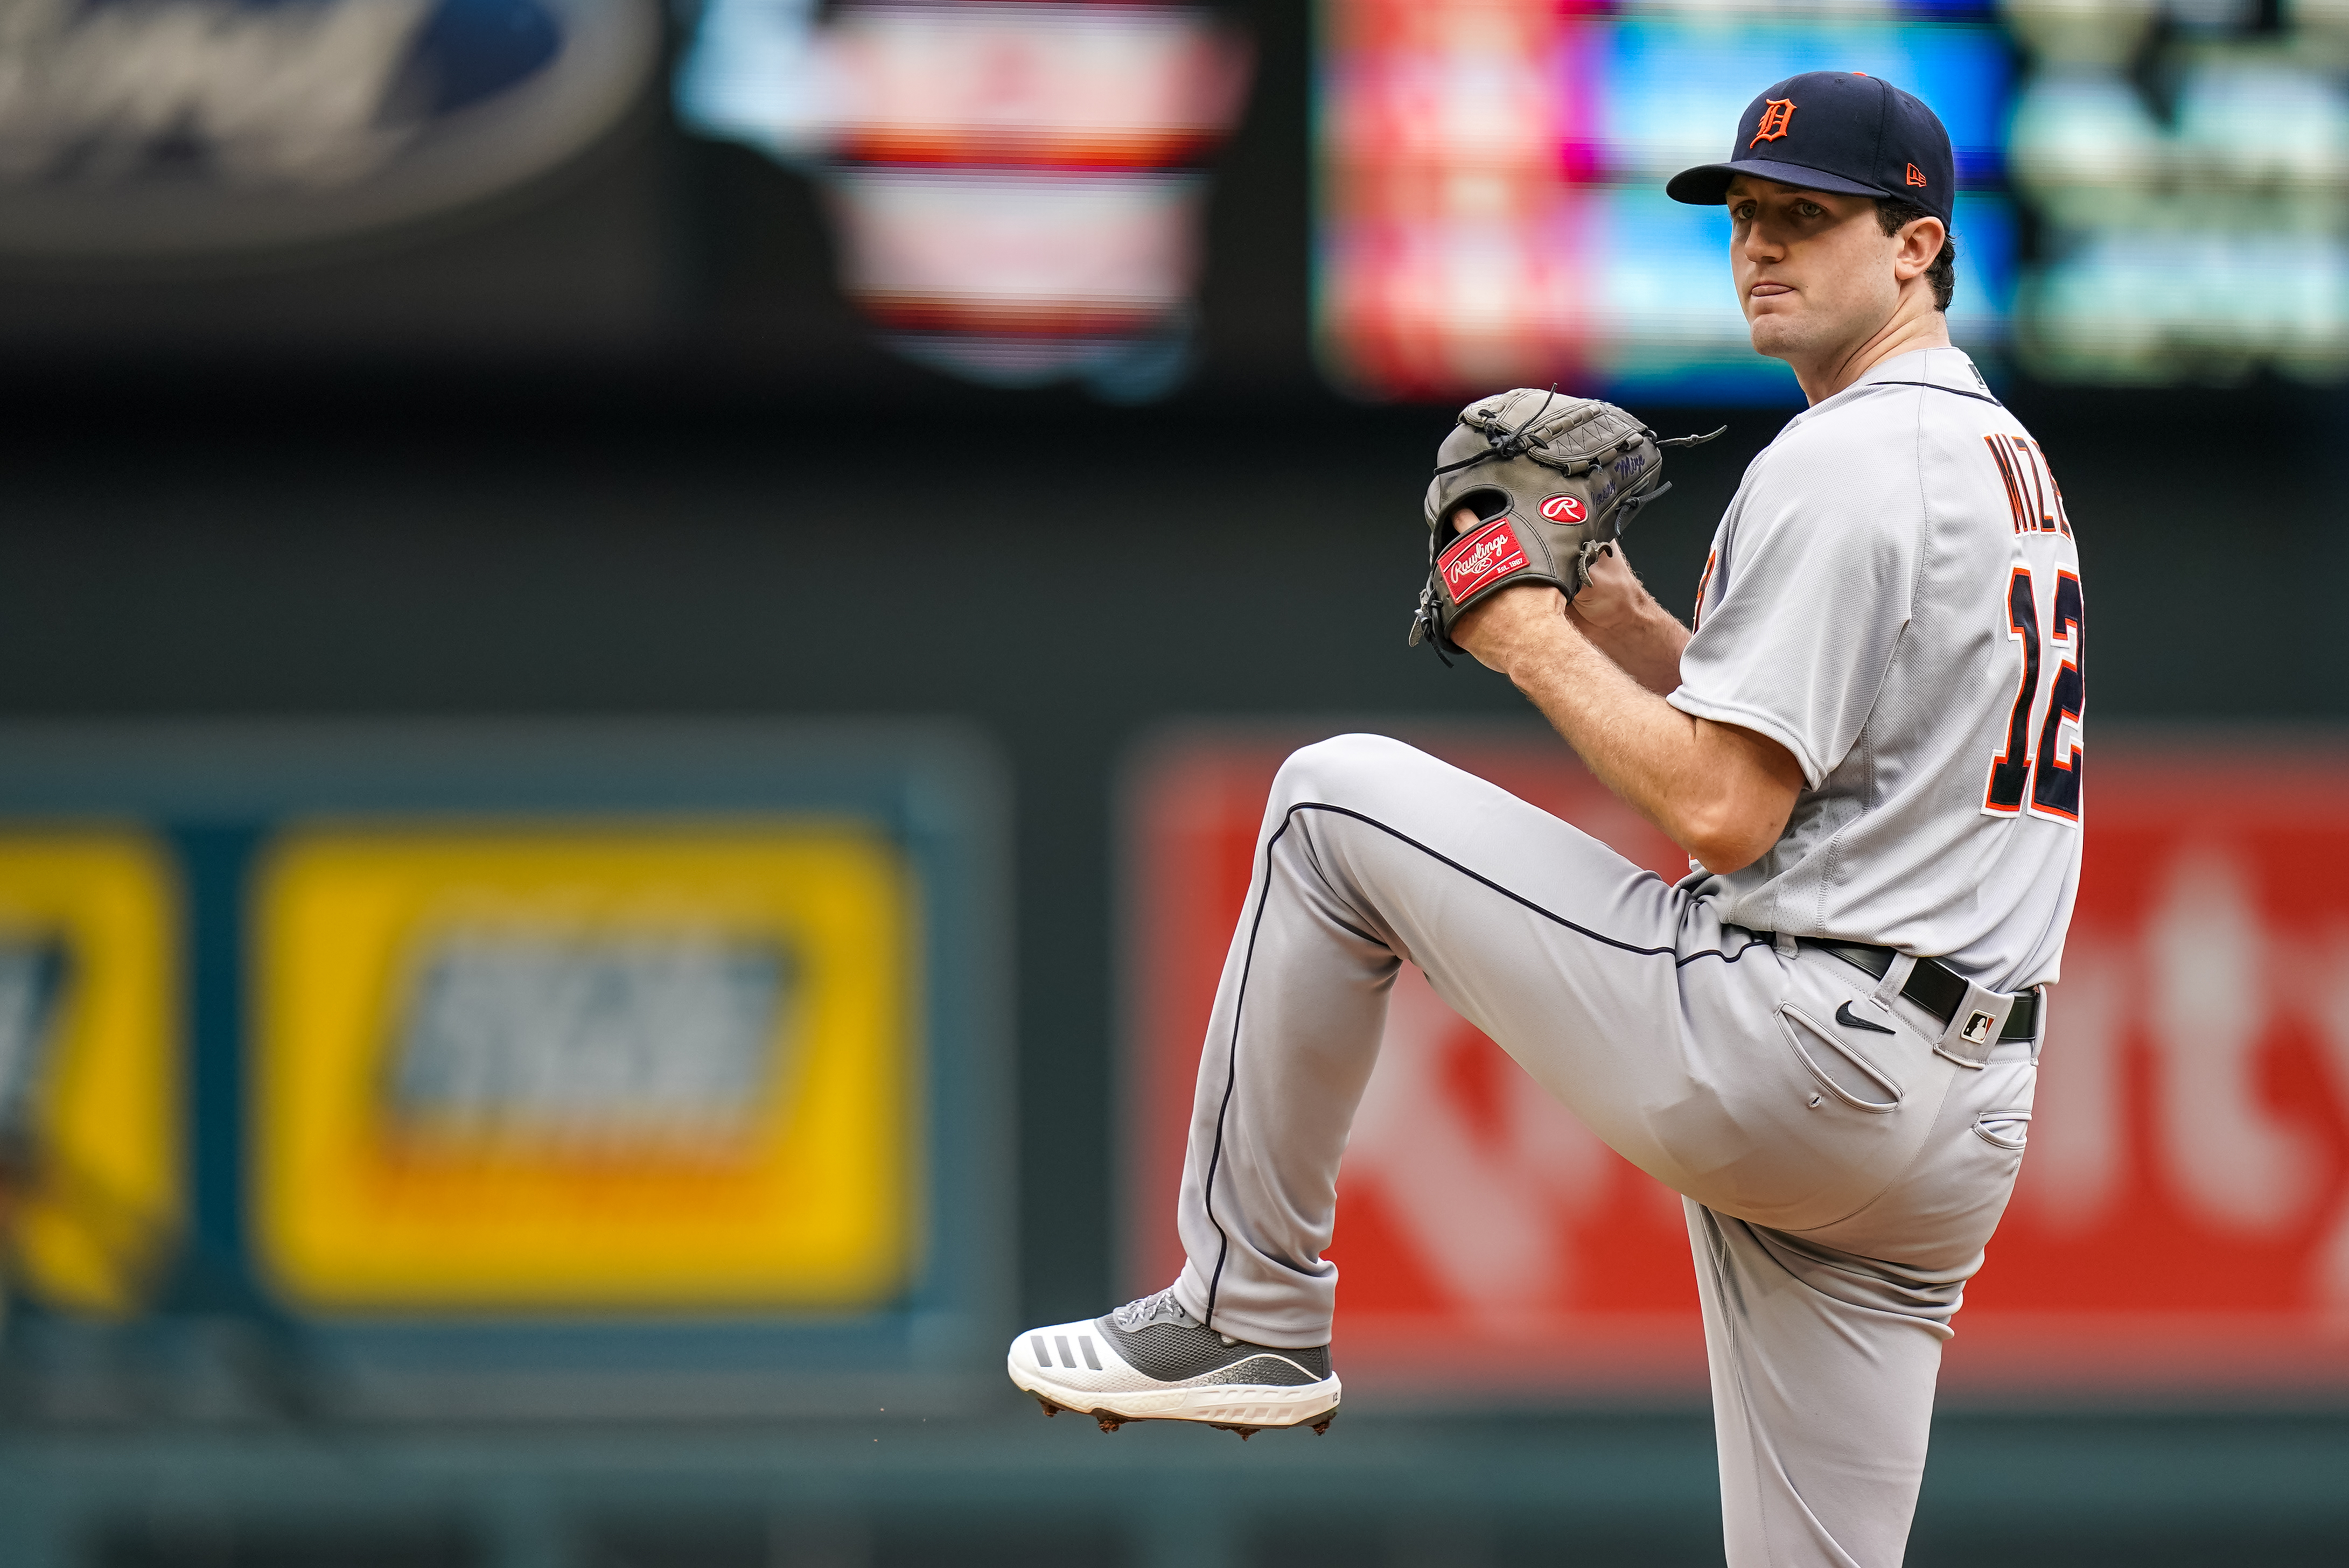 Detroit Tigers: 10 Free Agents to sign heading into the 2021 season